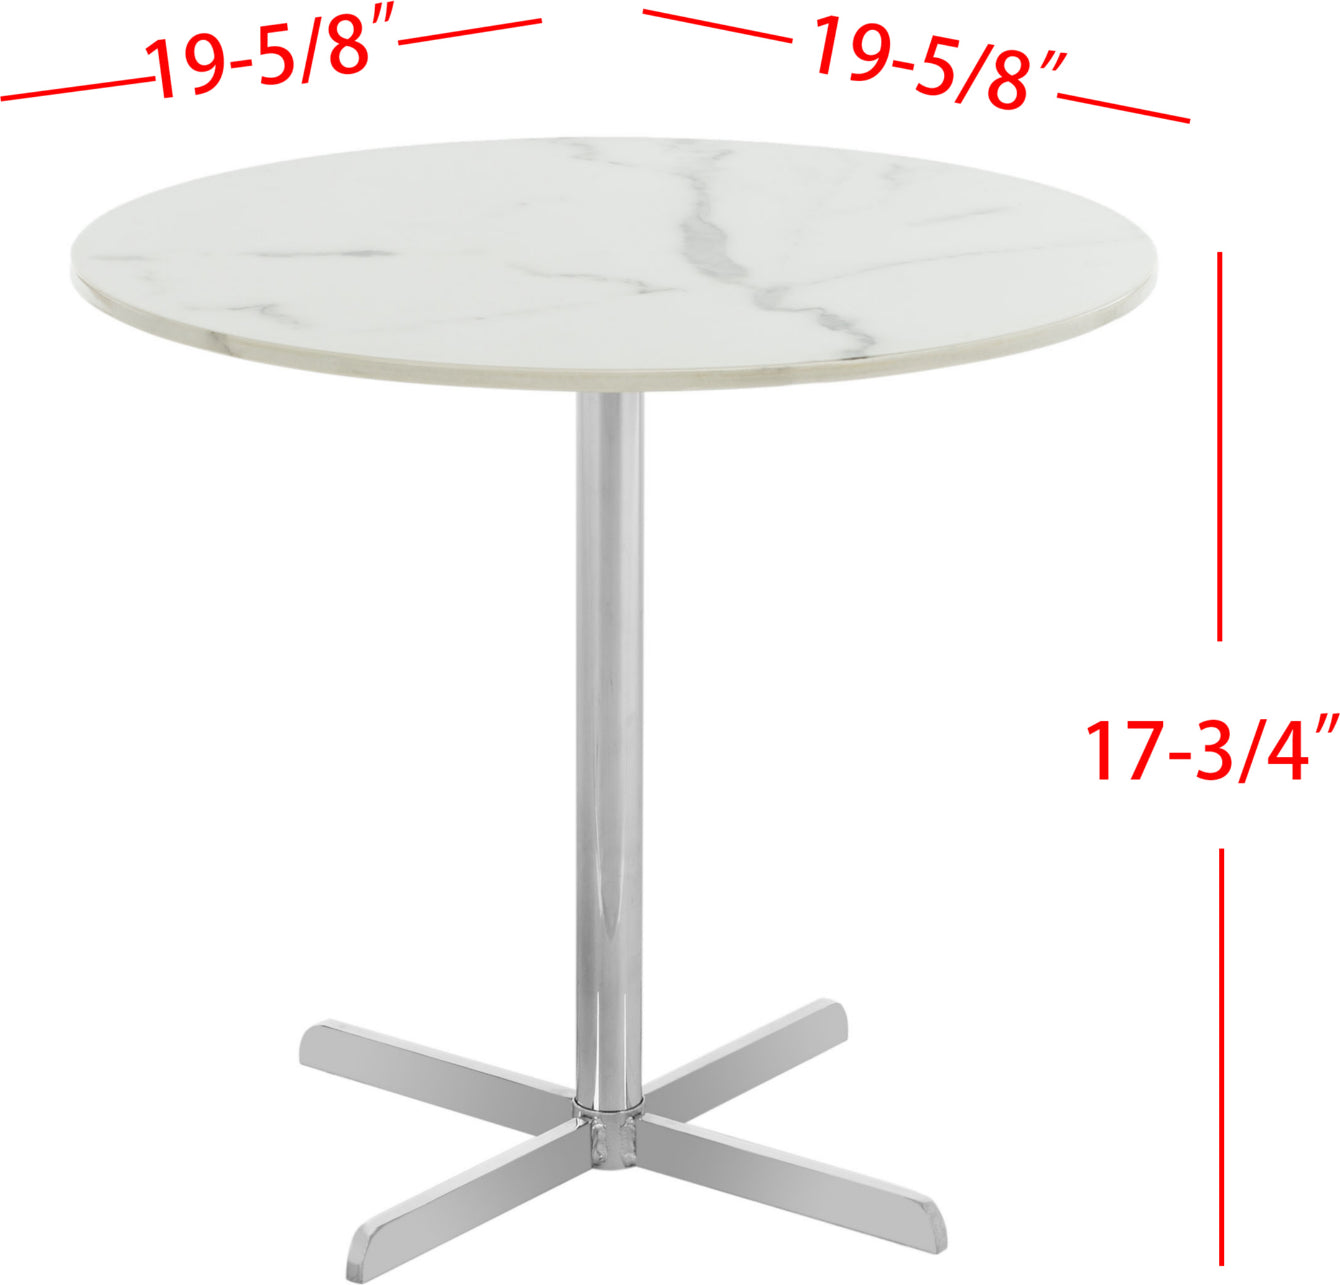 Safavieh Winnie Round Side Table White Marble and Chrome Furniture main image